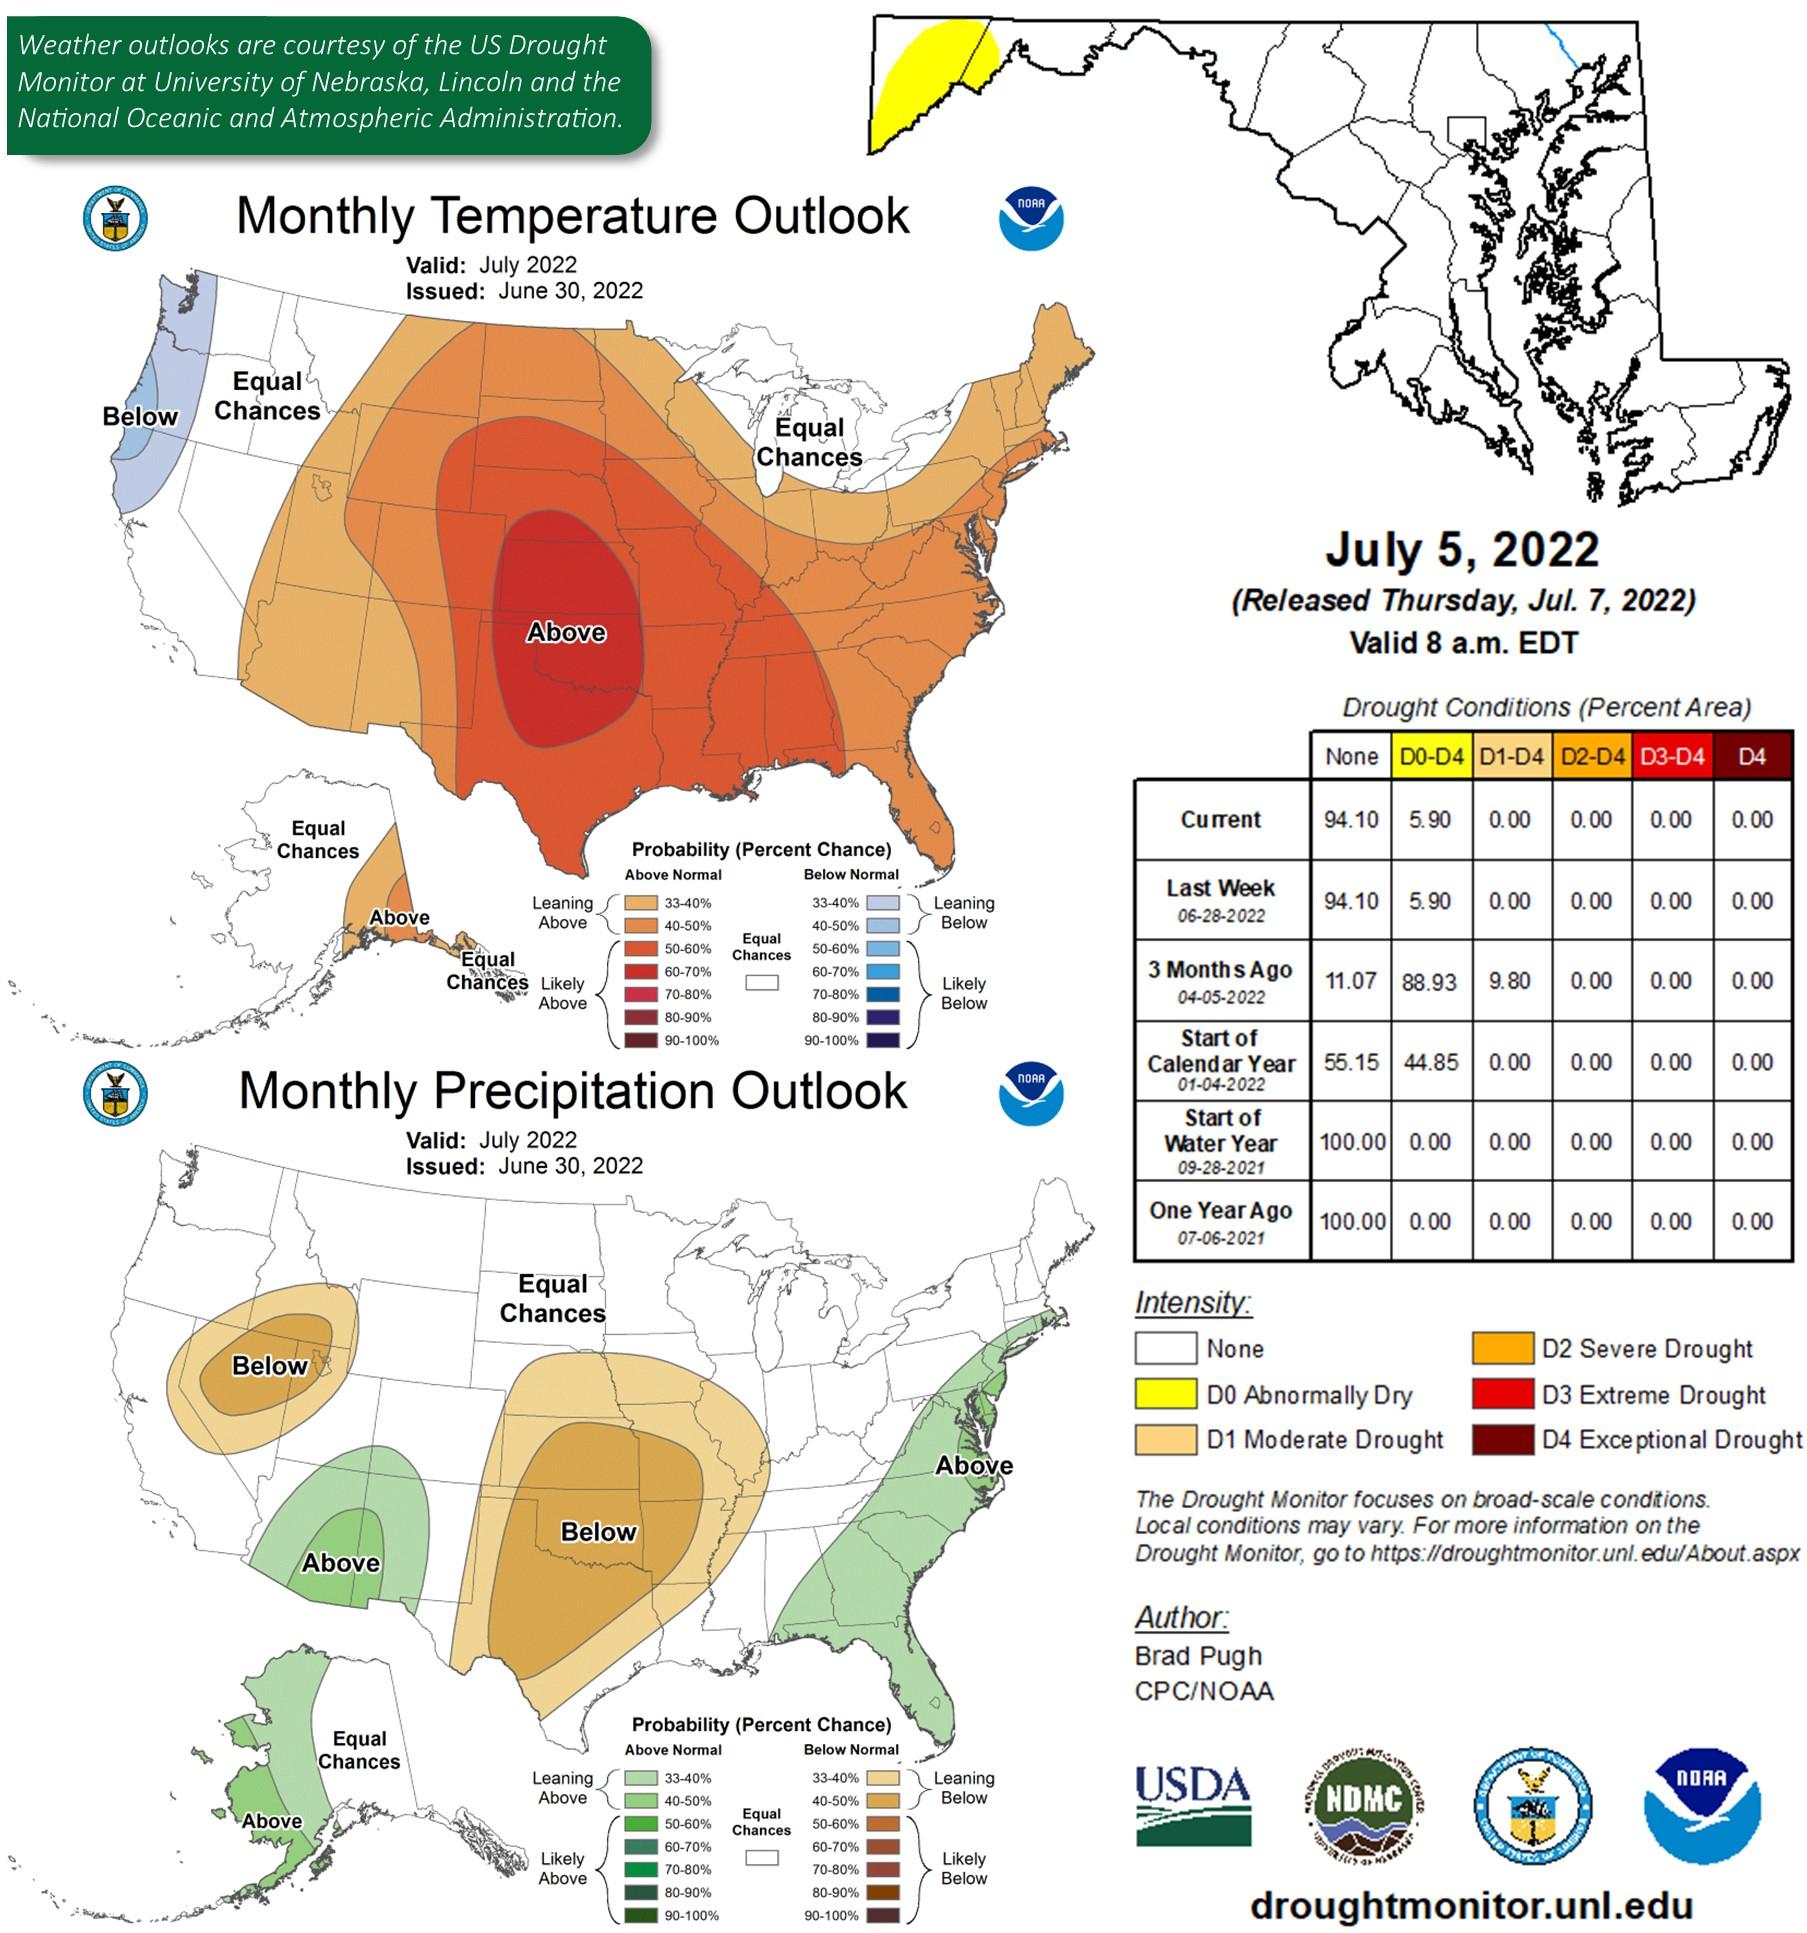 Weather Outlook for July 2022 (temperature, drought conditions, and precipitation outlook)